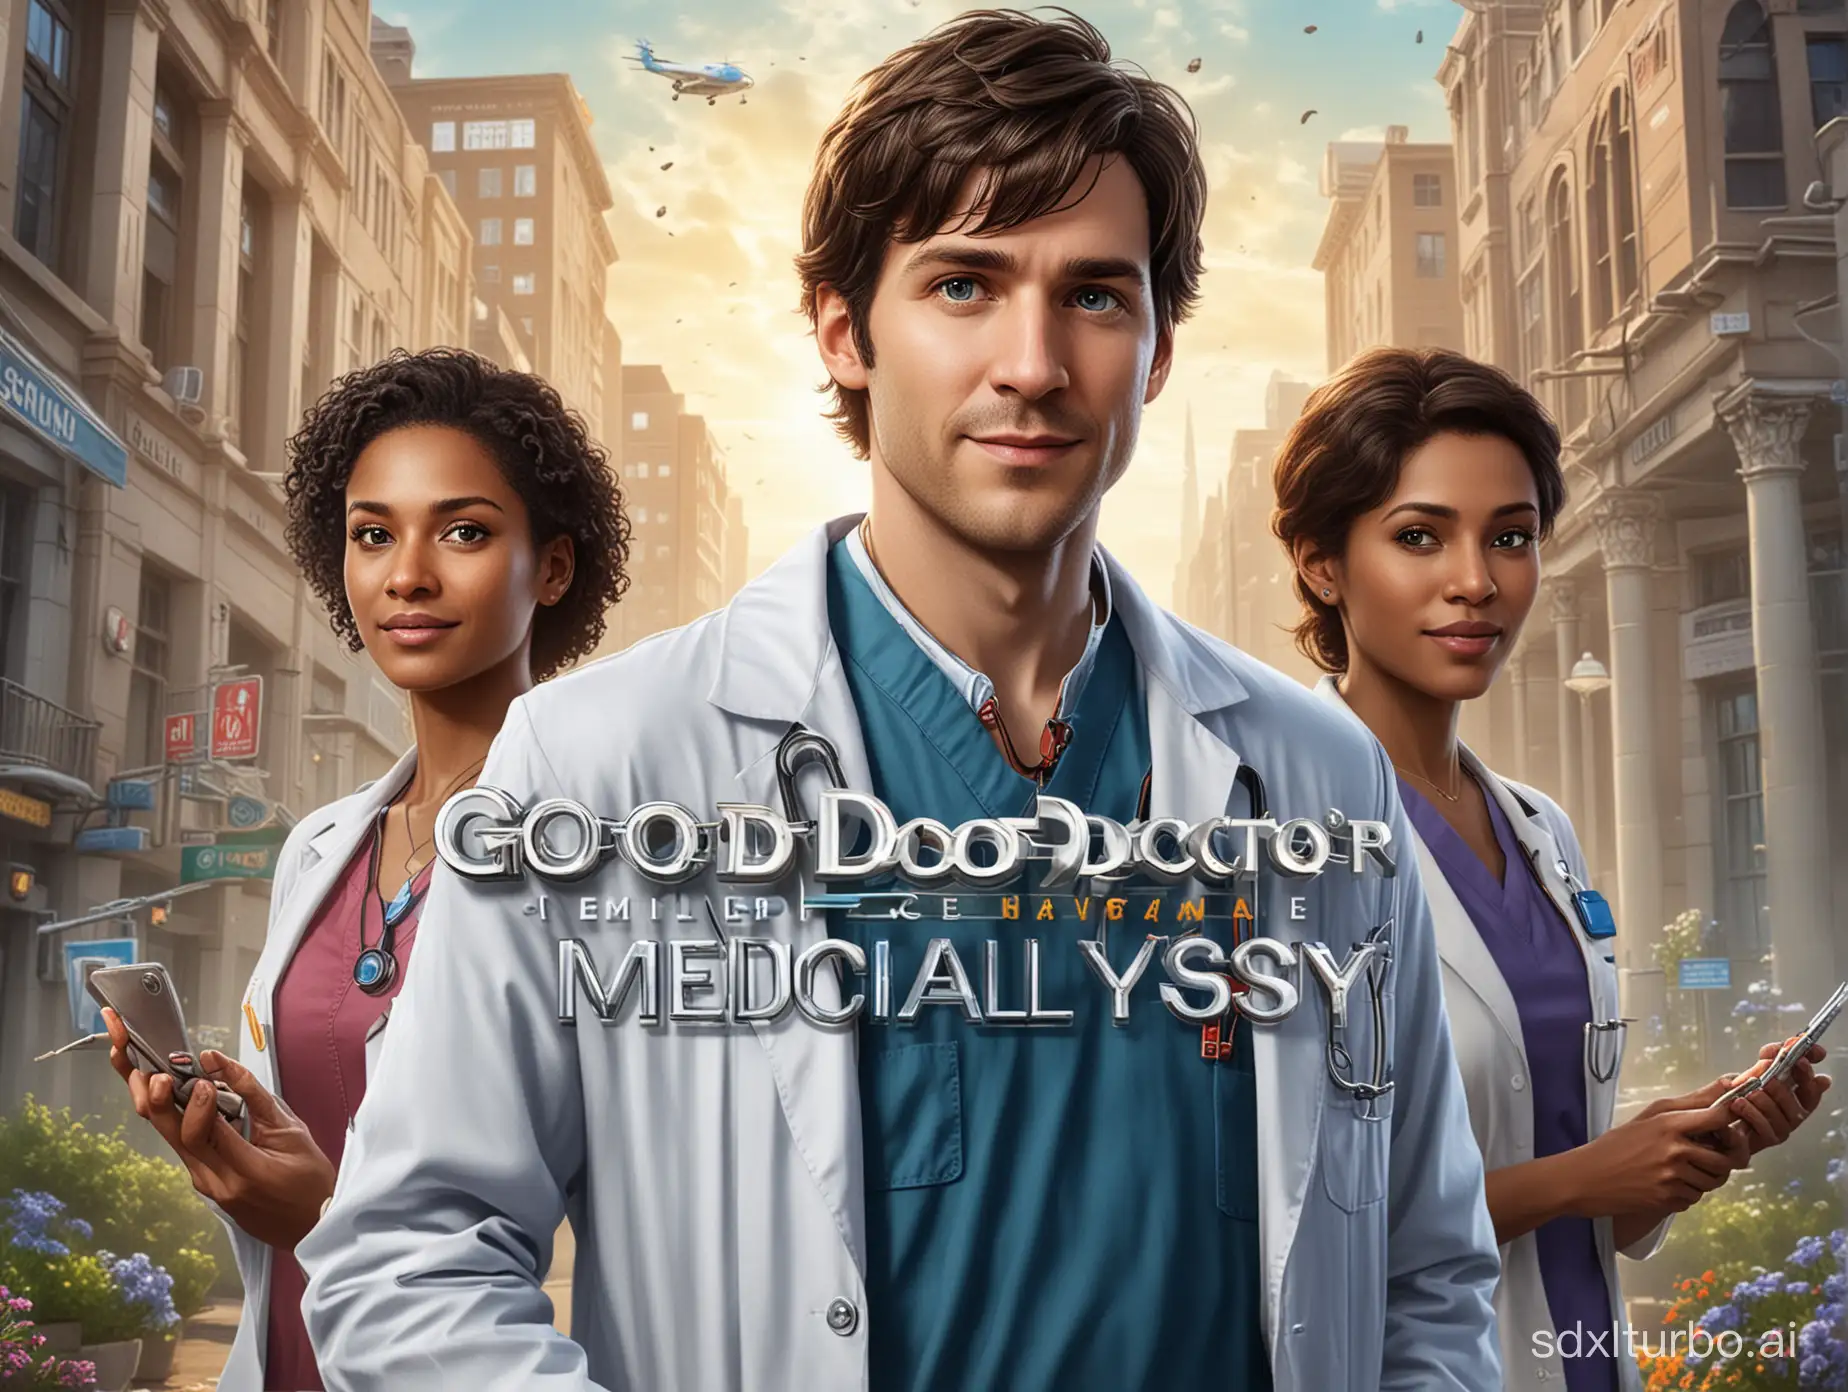 A realistic cover image of a PC game about medicine titled "Good Doctor: Medical Odyssey".